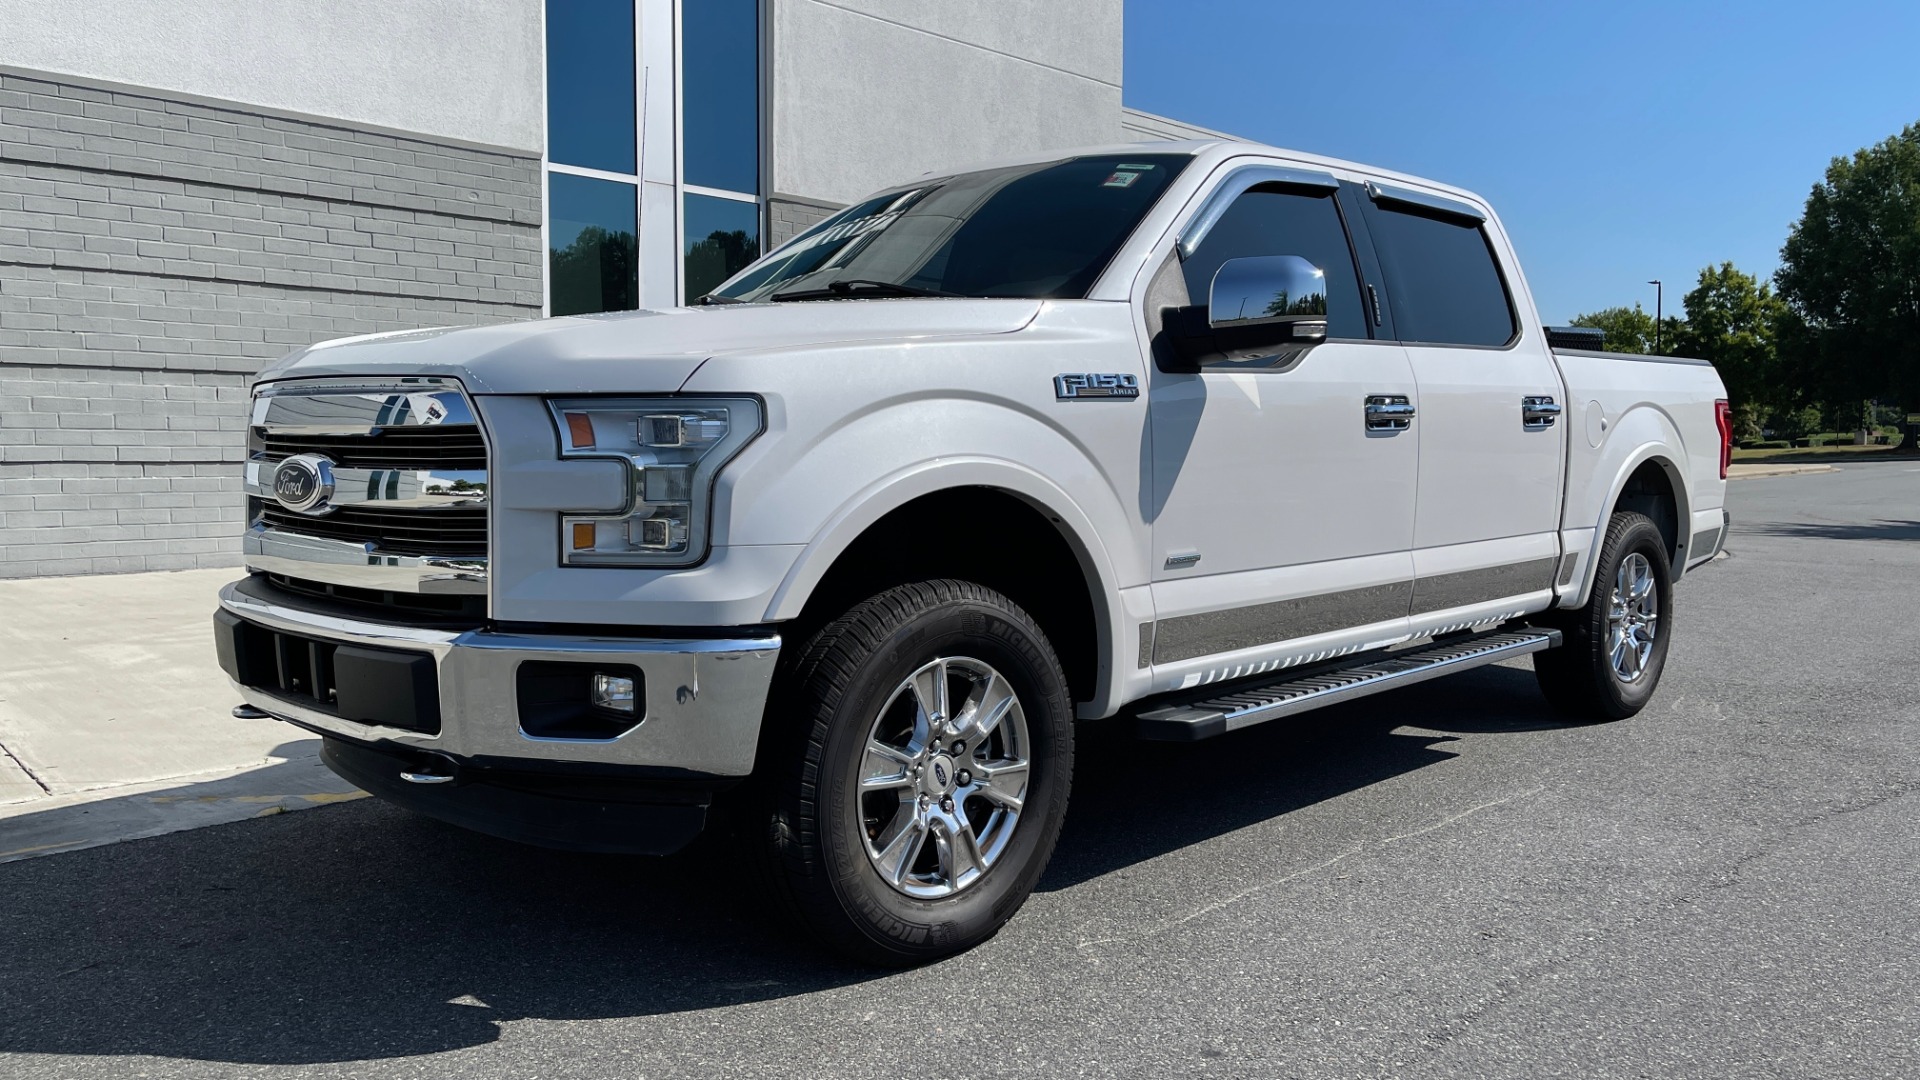 Used 2016 Ford F-150 LARIAT 4X4 / 3.5L V6 / 6-SPD AUTO / BLIS / SONY / NAV / REARVIEW for sale Sold at Formula Imports in Charlotte NC 28227 3